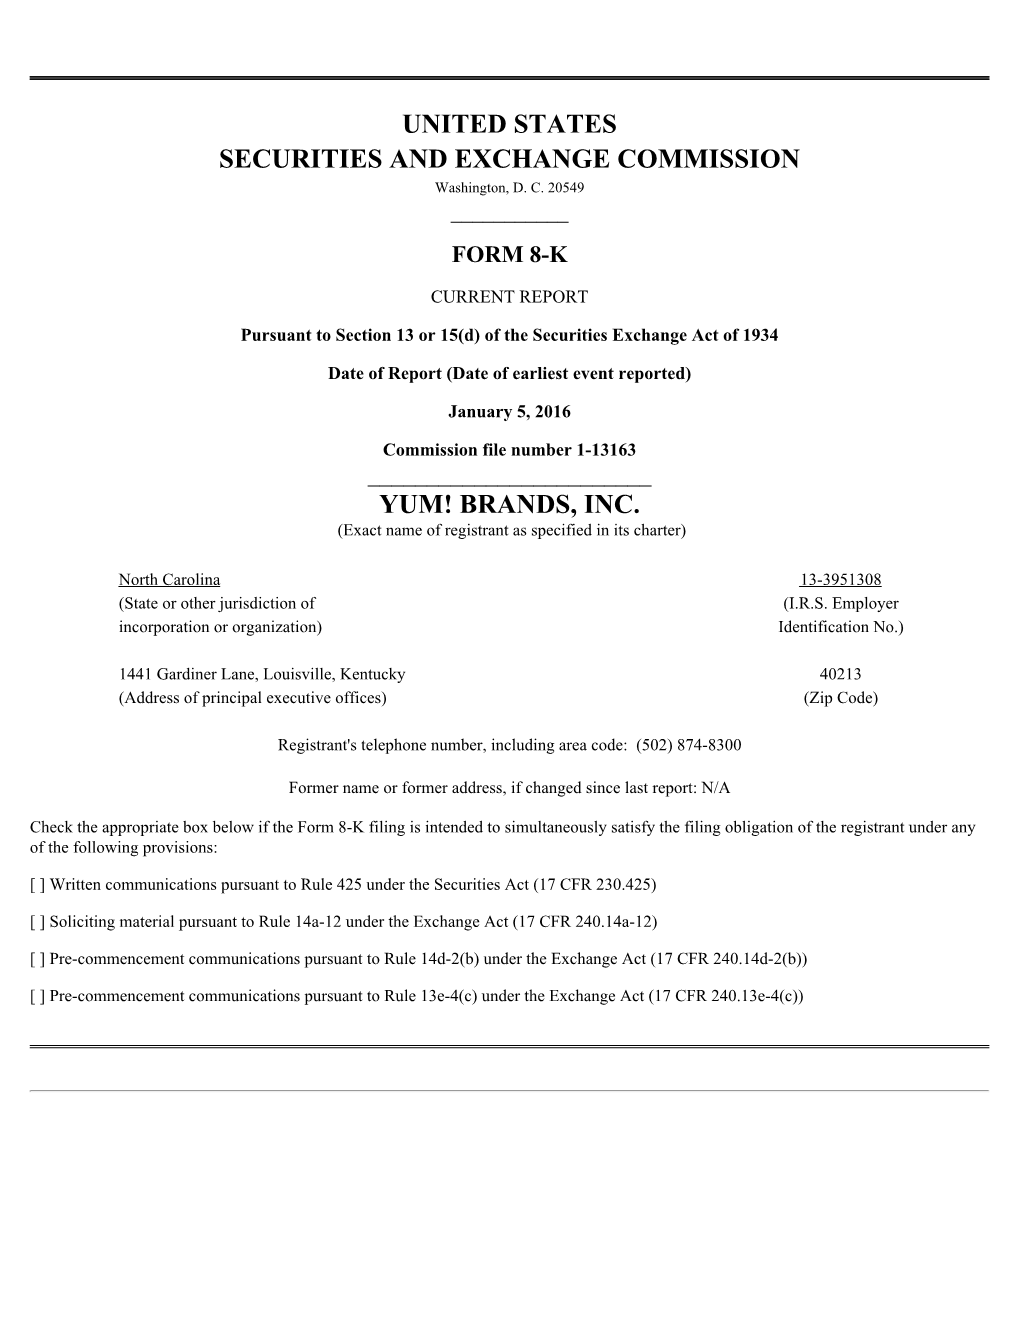 UNITED STATES SECURITIES and EXCHANGE COMMISSION Washington, D